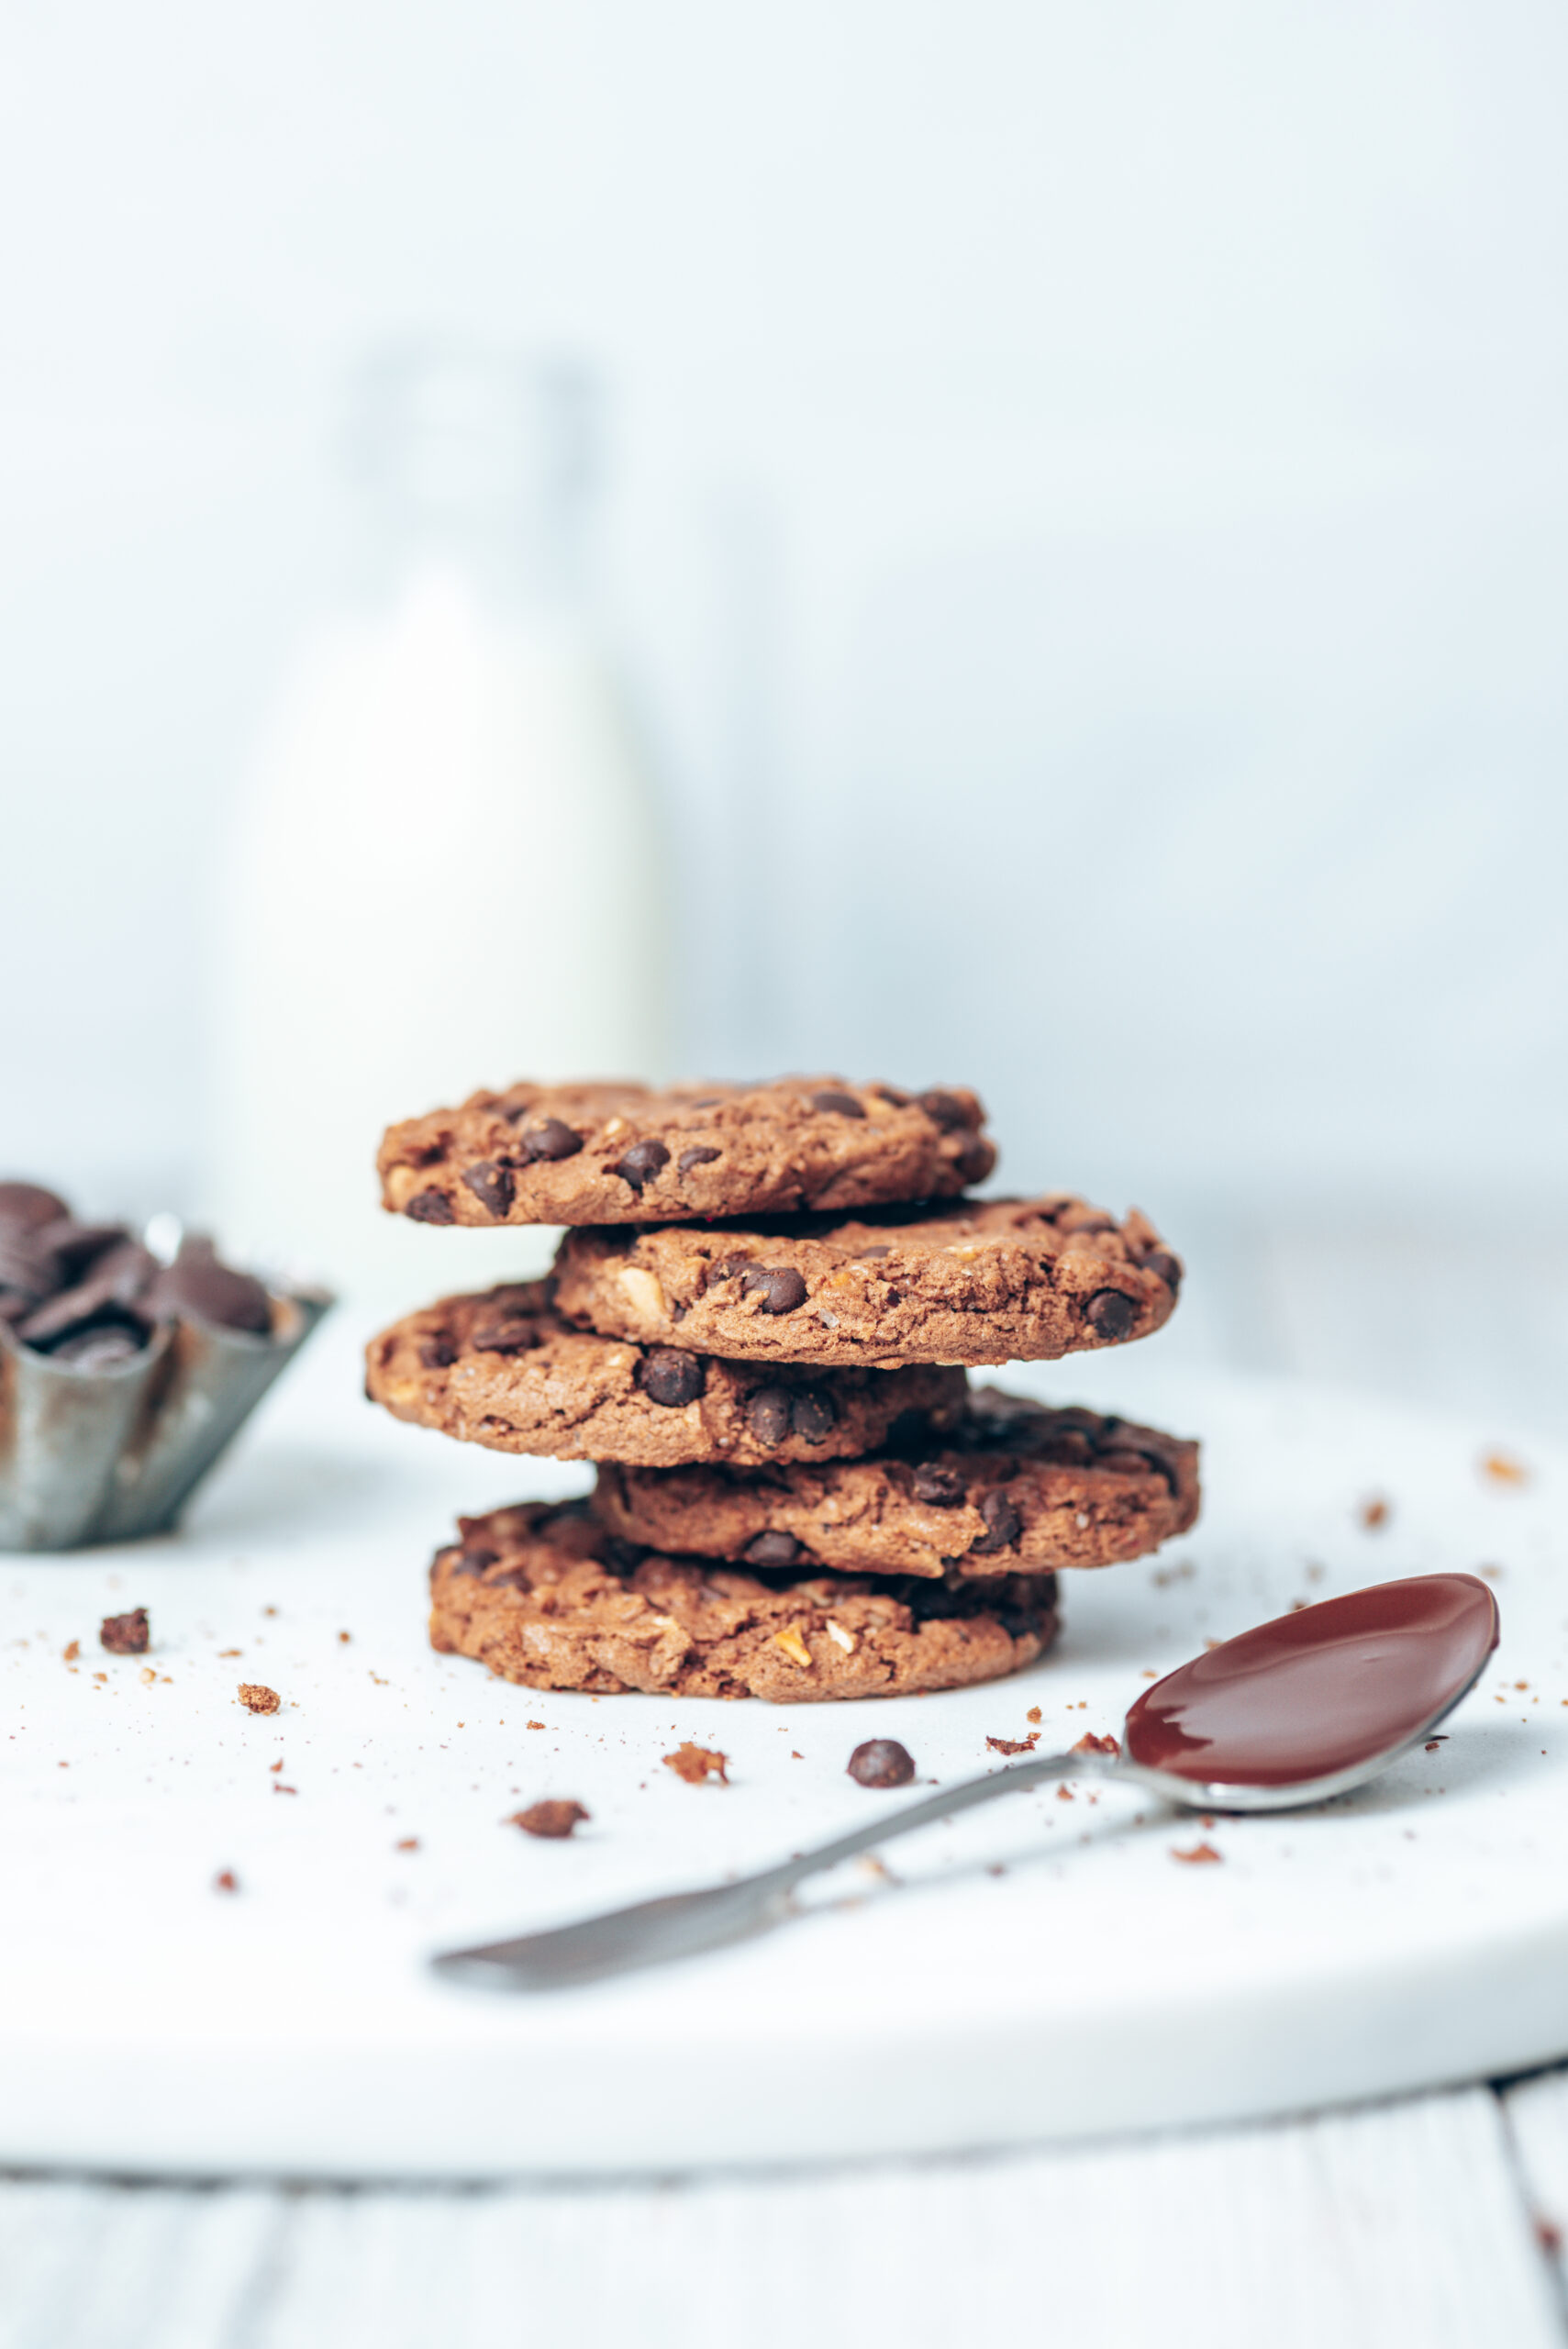 Cookies - Light & Bright Food Photography